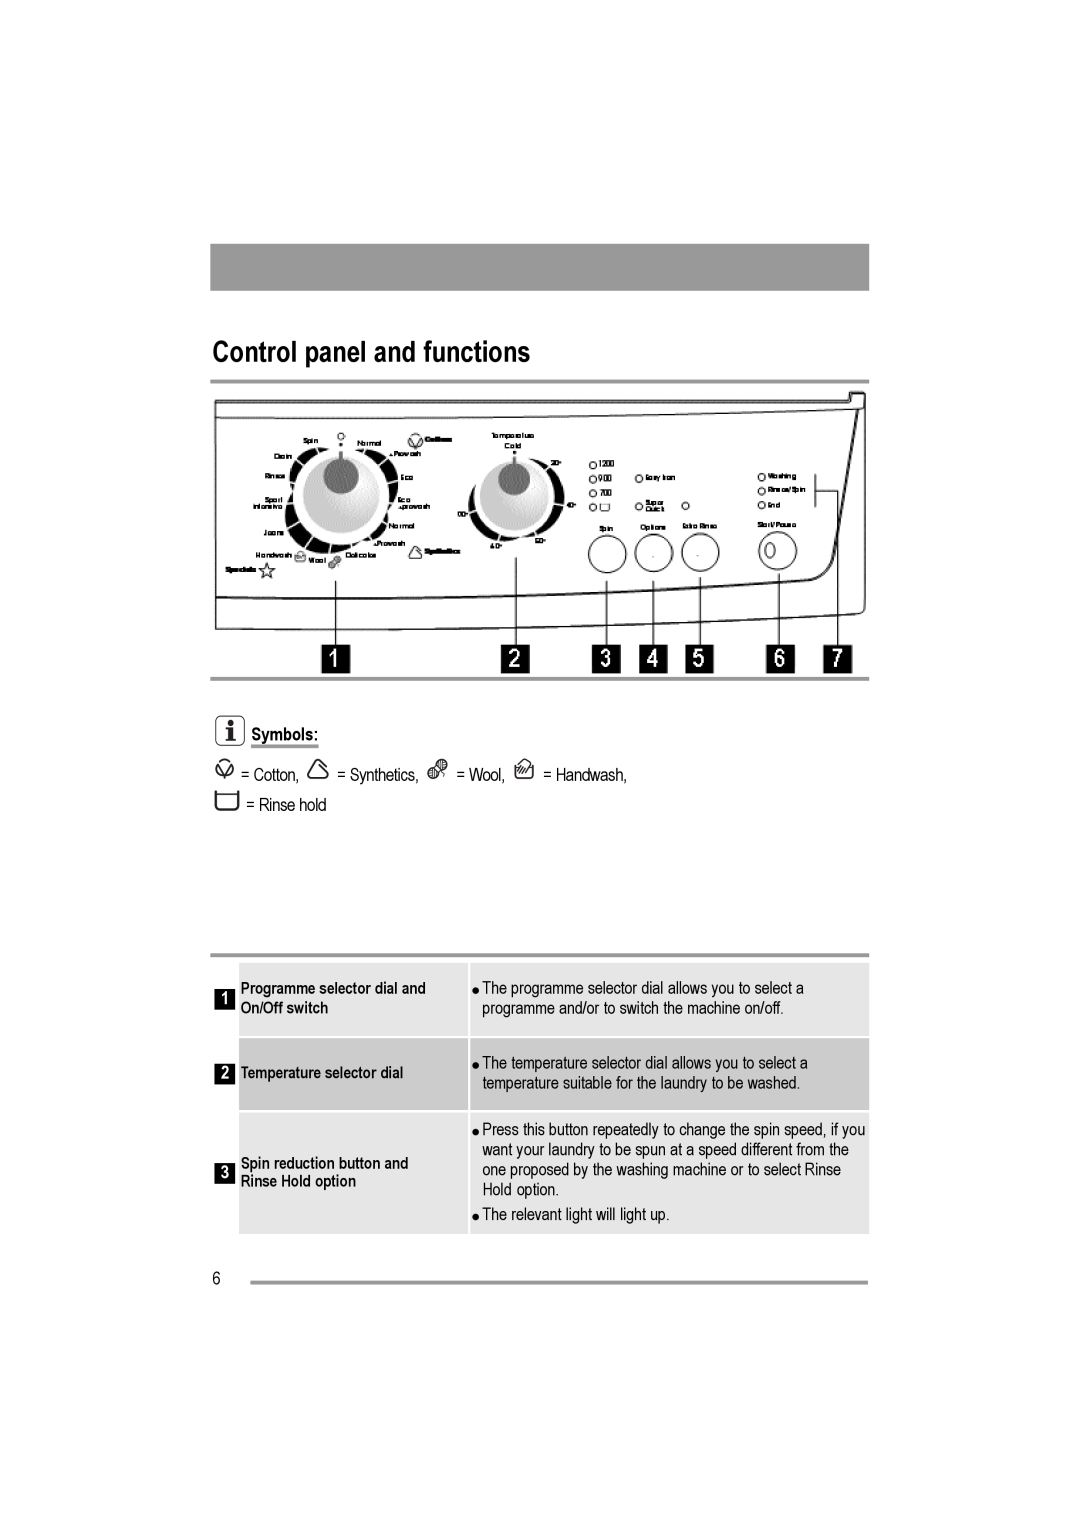 Electrolux AW 1402 W, AW 1202 W user manual Control panel and functions, Symbols 